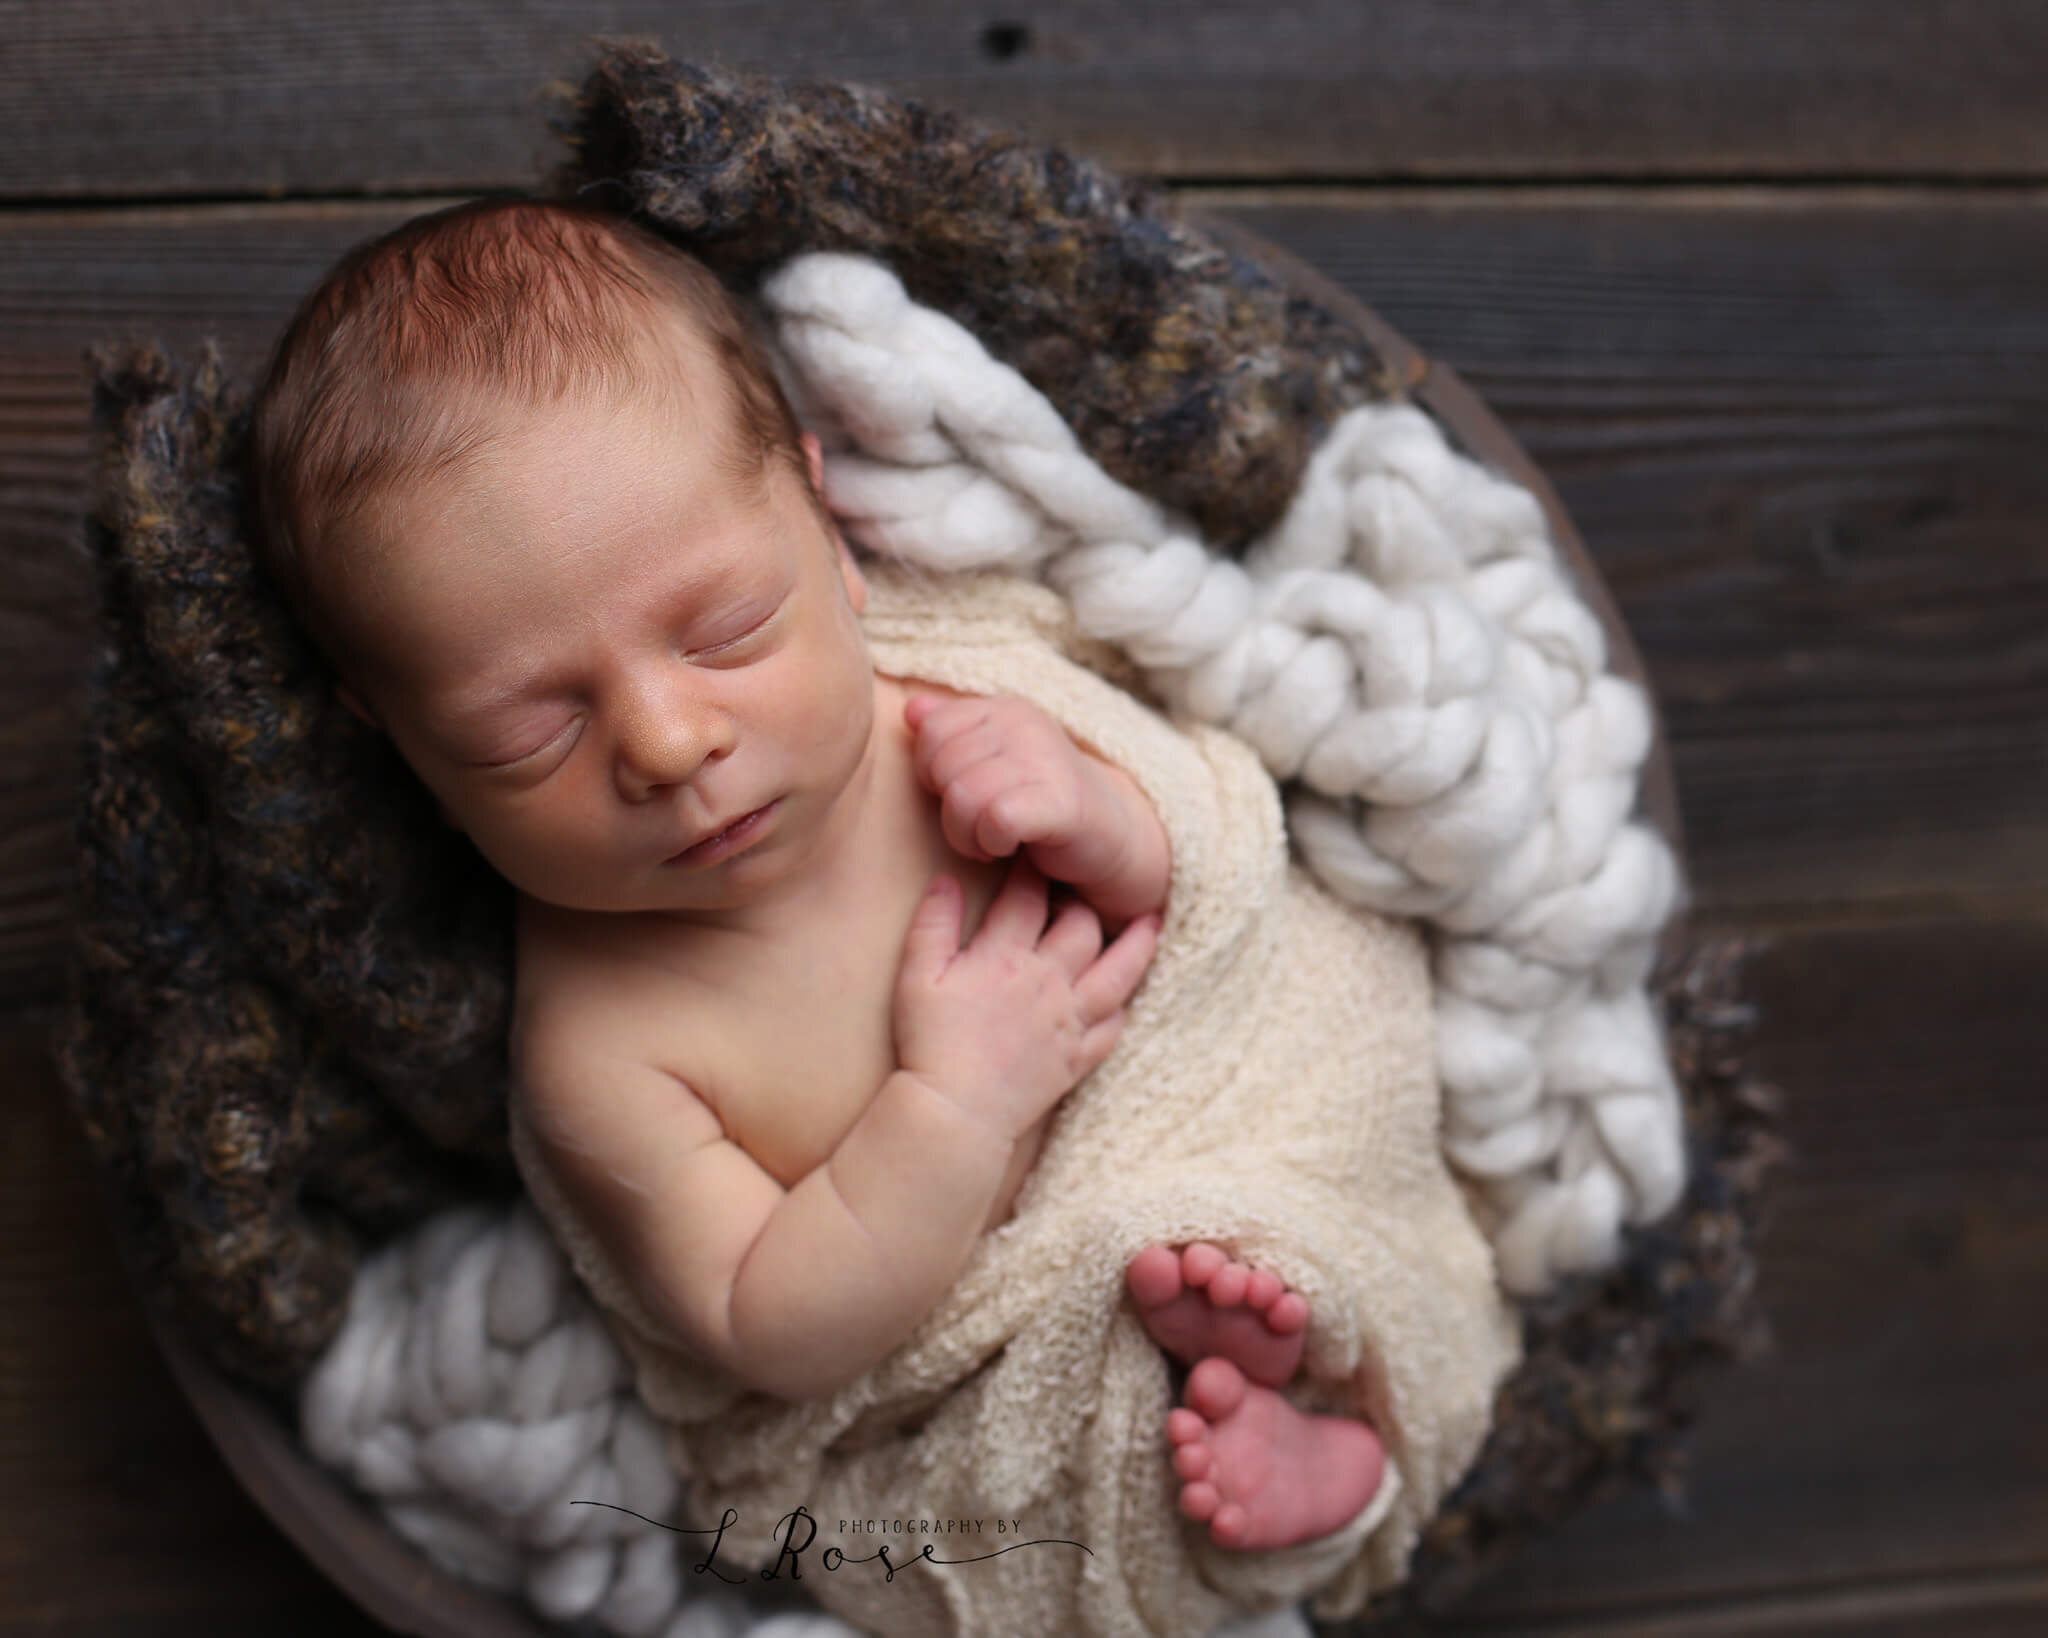  An image of a newborn baby wrapped tightly in gauze with hands and feet peeking out, sleeping in a basket lined with soft yarn blankets by Photography by L Rose in San Diego California 